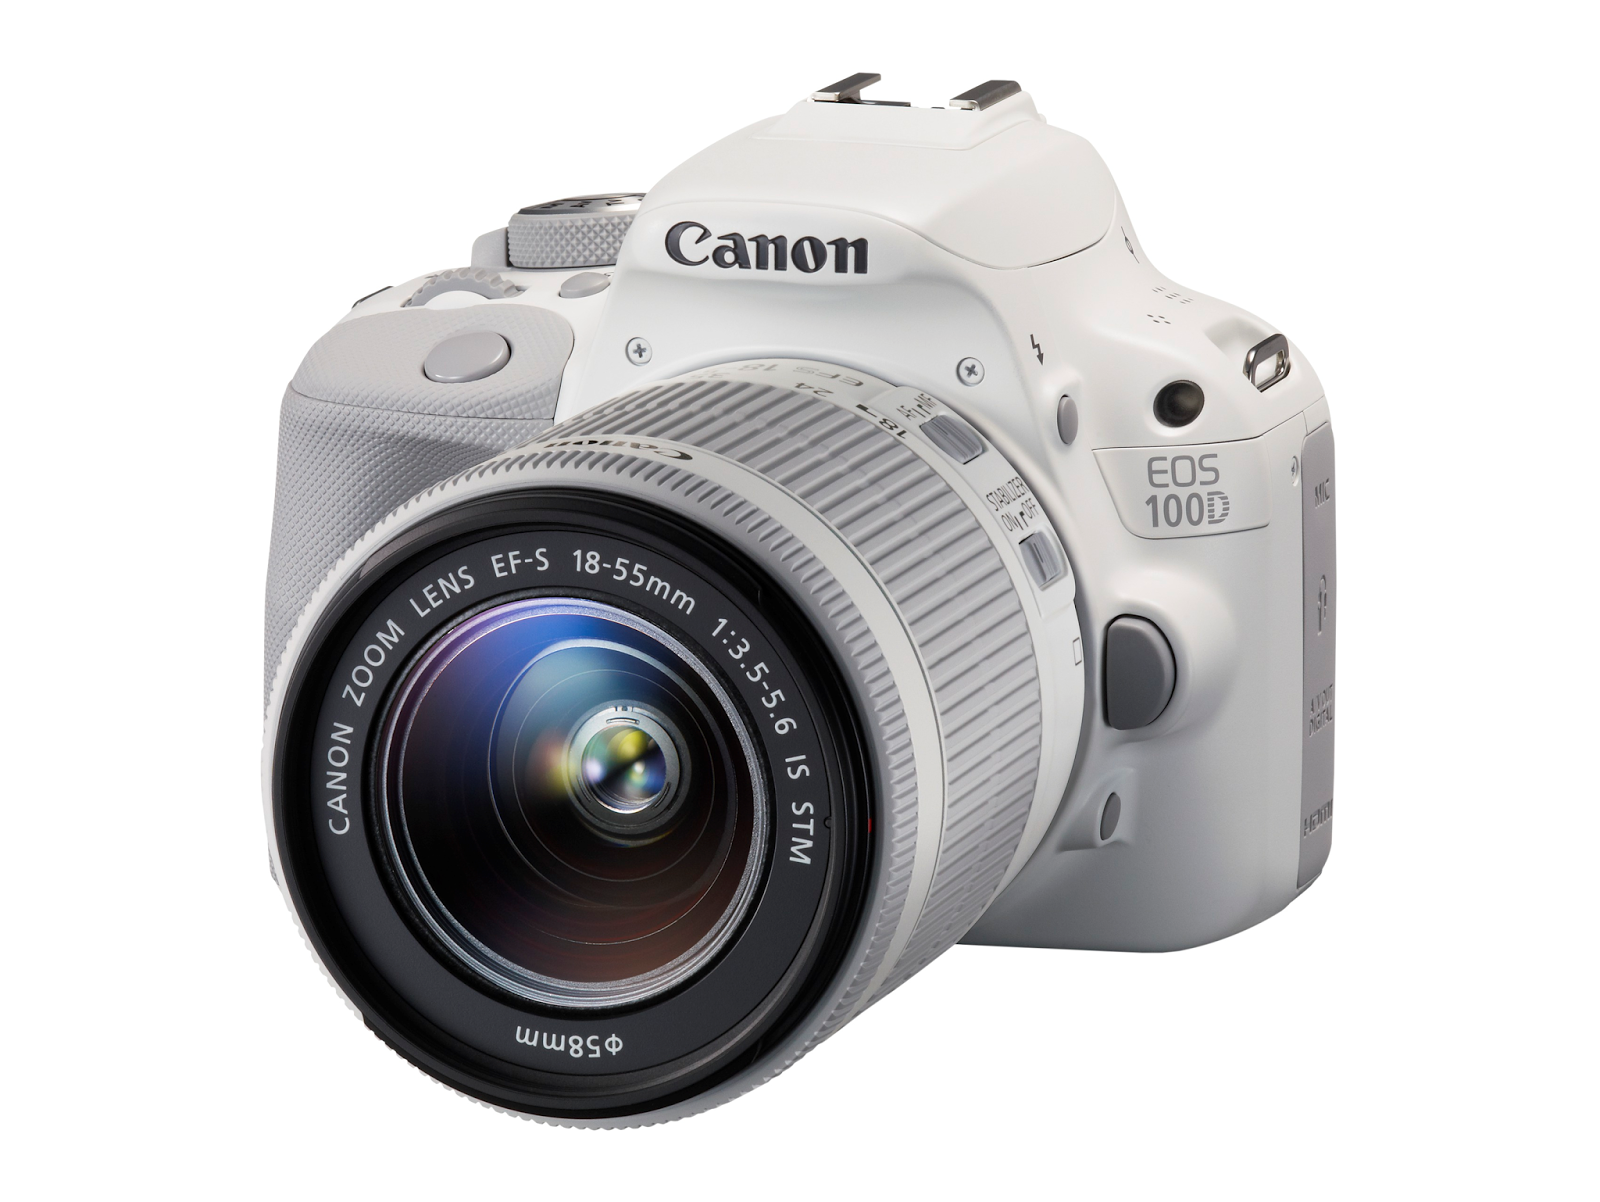 Canon Camera News 2022: Canon unveils white editions of EOS 100D and 18-55mm IS STM